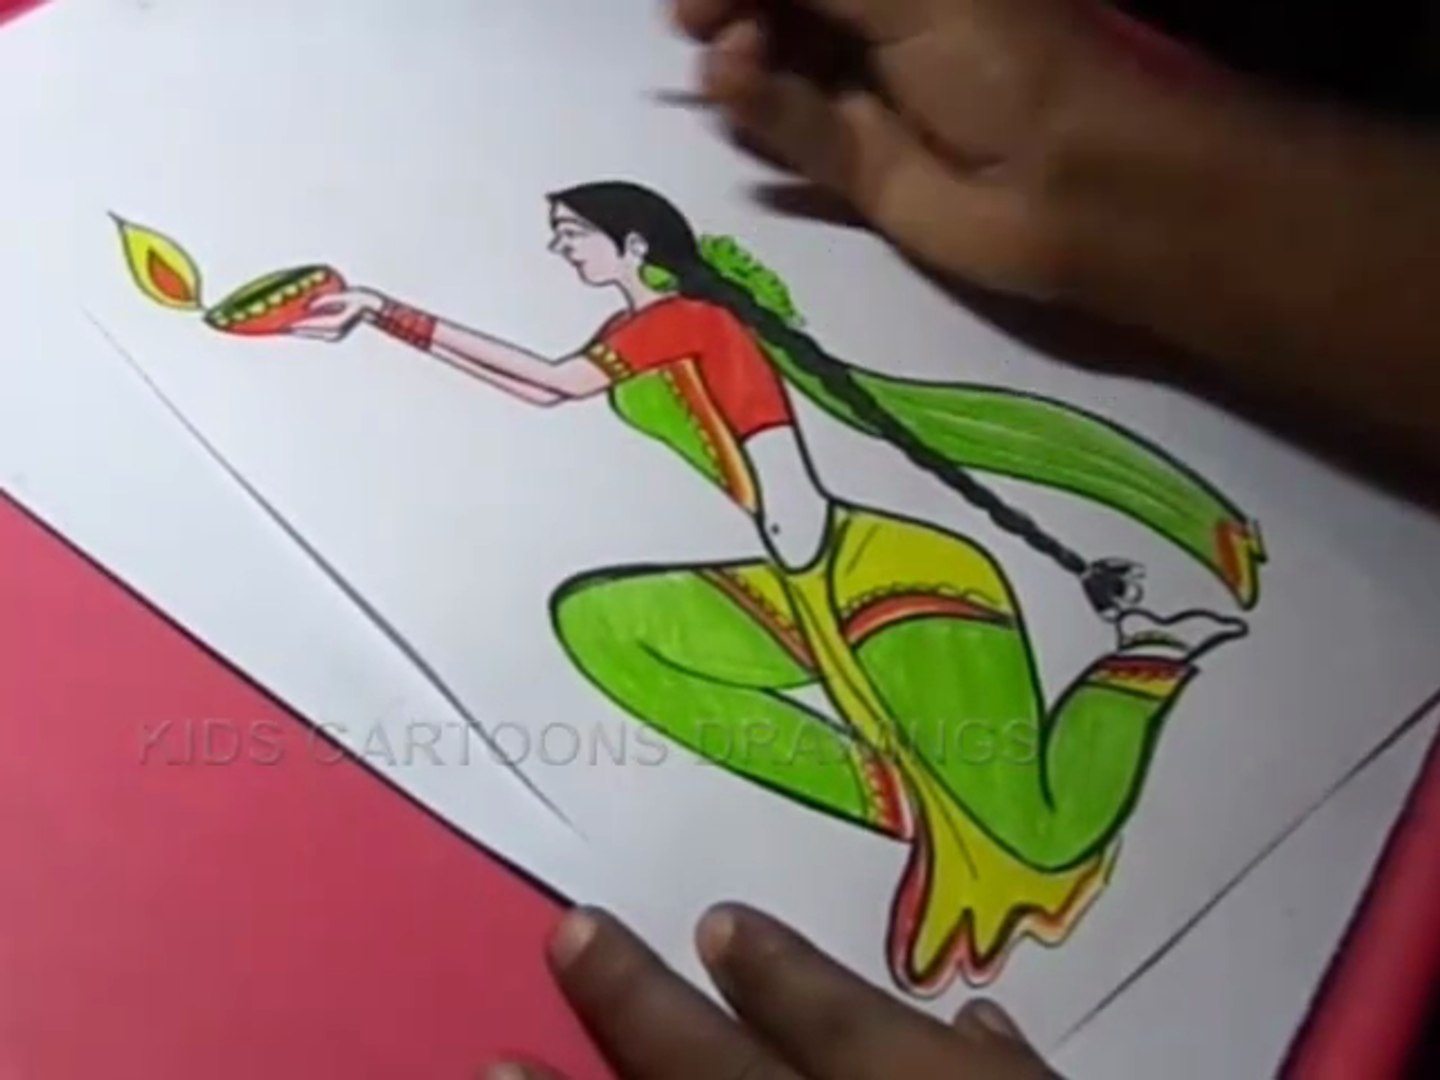 How to Draw Diwali Greeting Drawing Step by Step for Kids - video  Dailymotion